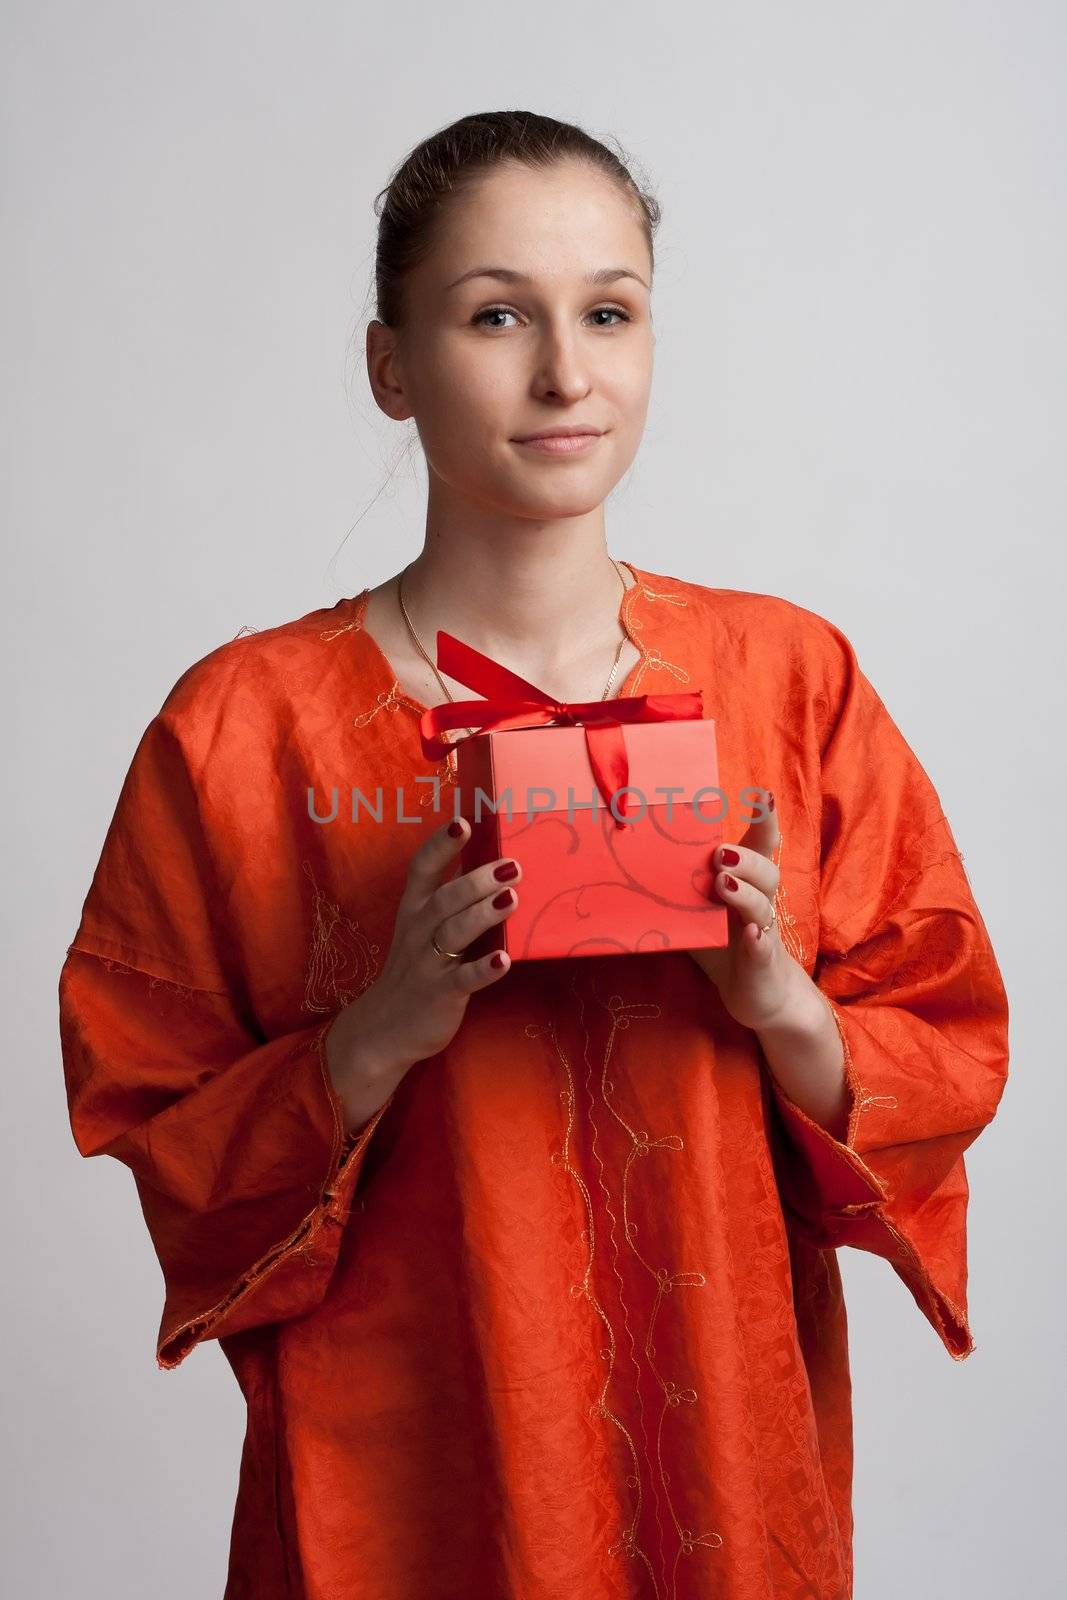 Girl in orange dress with a gift in the hands of by victosha